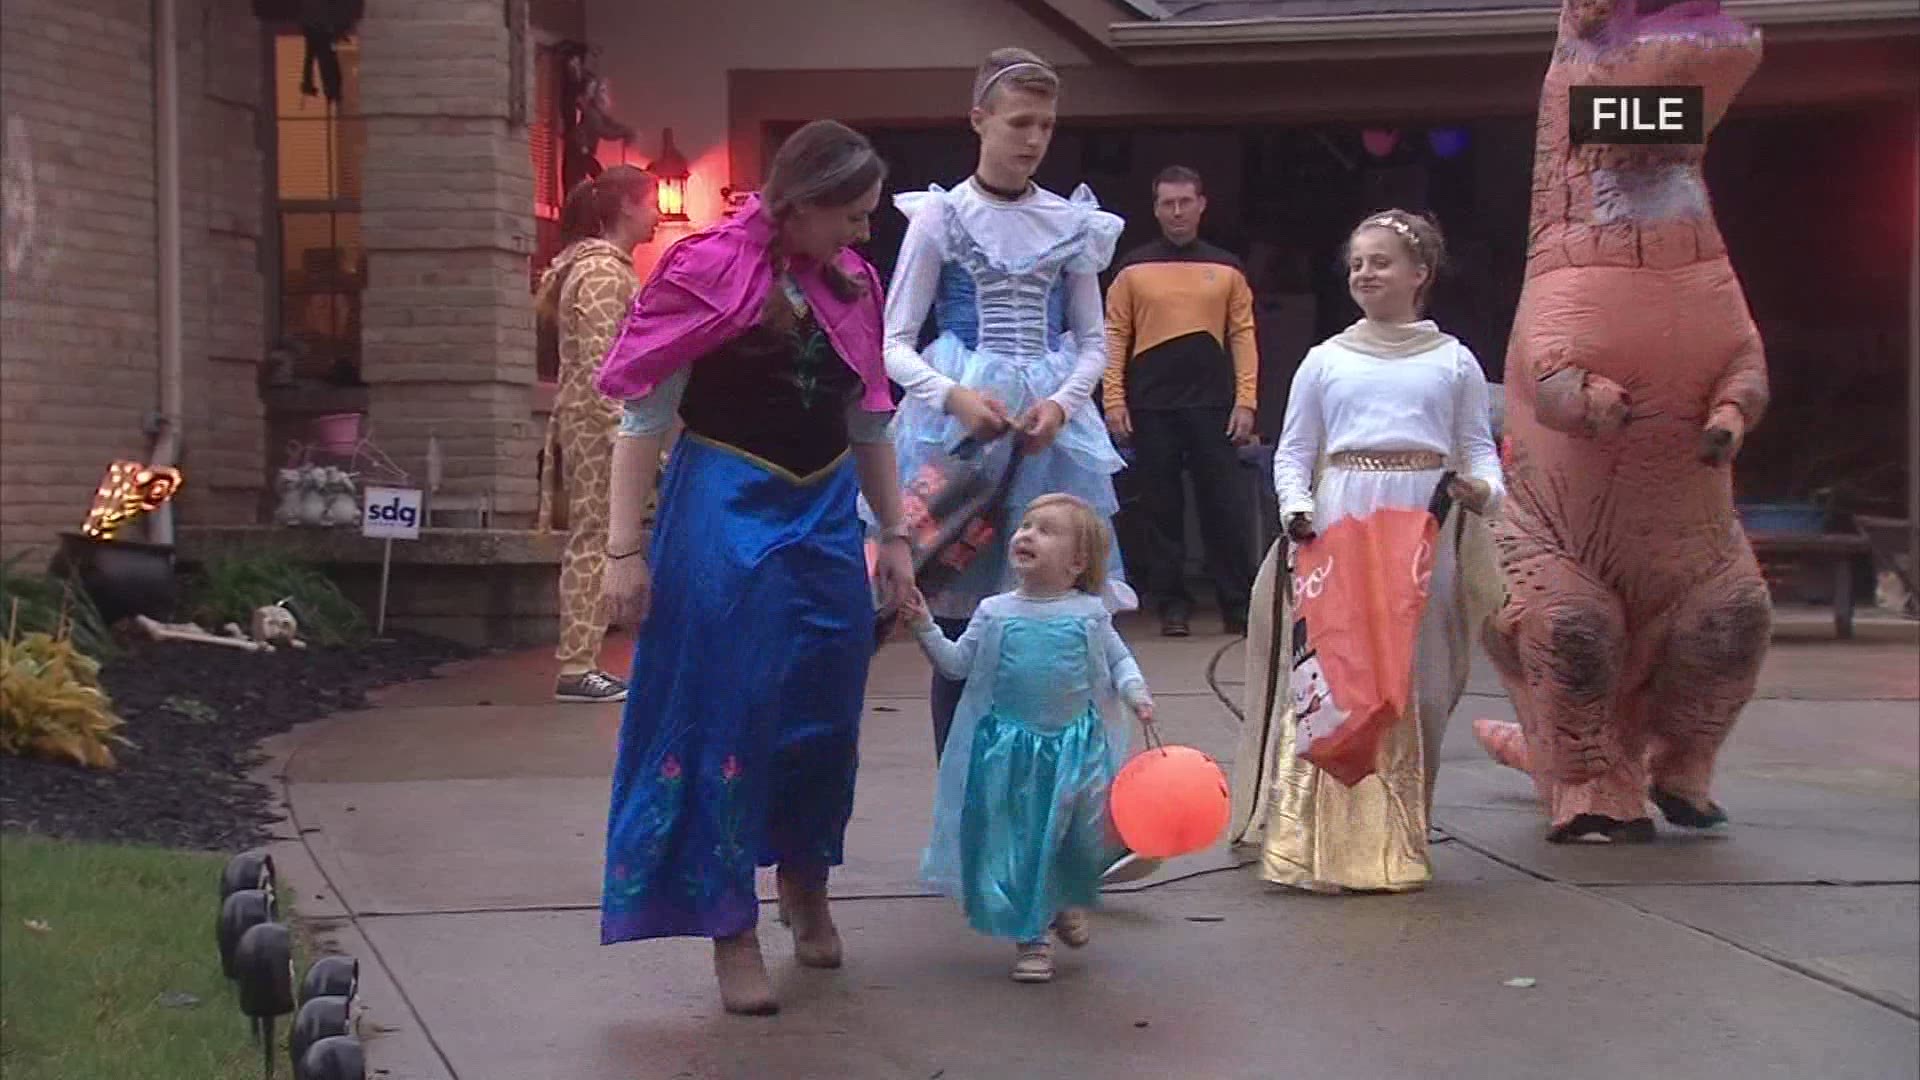 Rain and Covid-19 are affecting the Halloween plans for many in central Ohio.